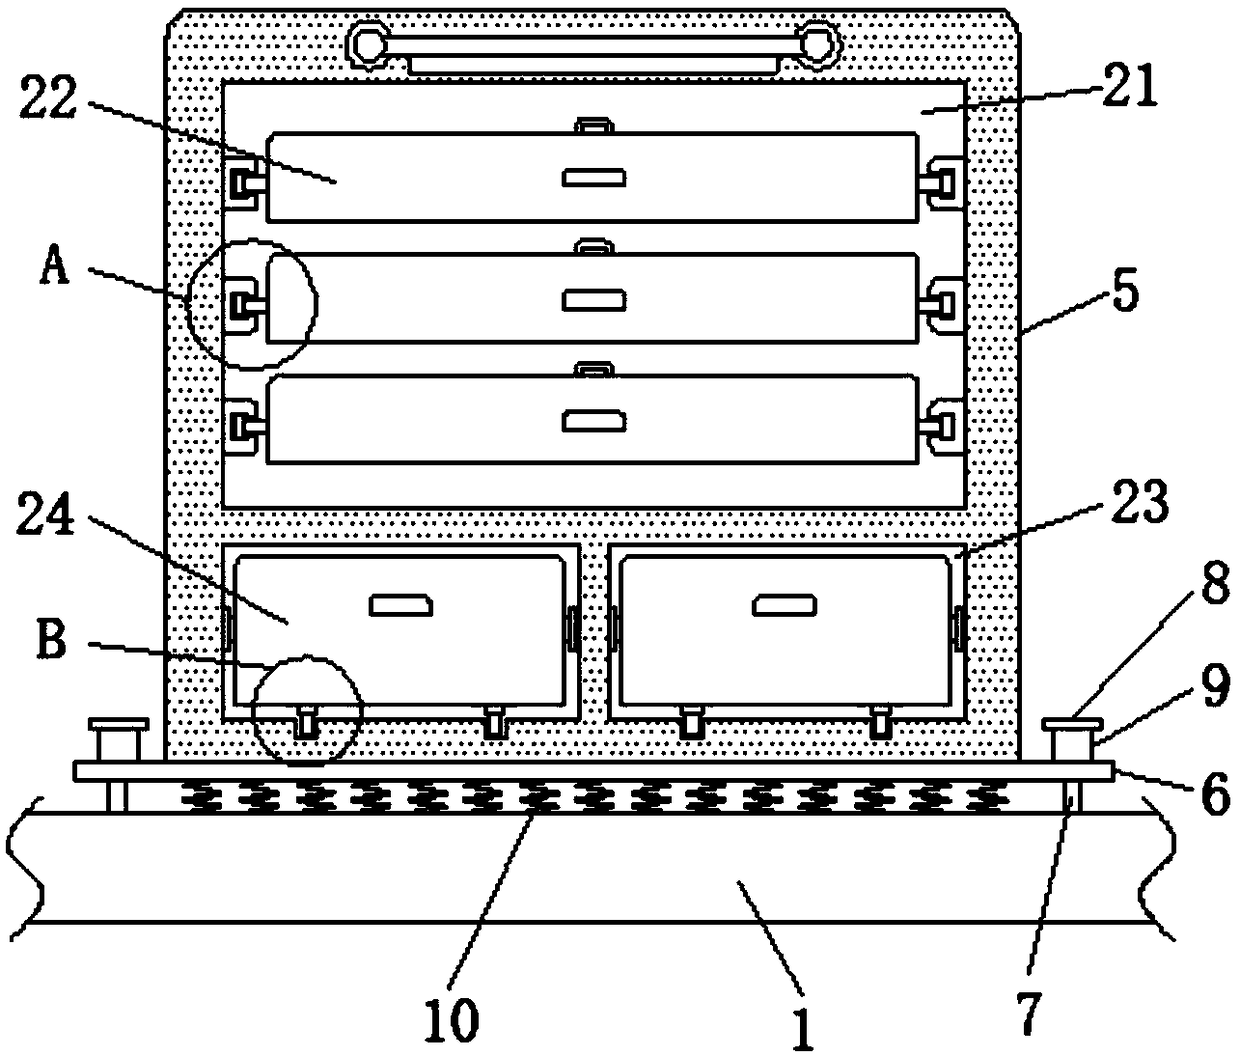 Engineering multi-level mechanical part transporting device